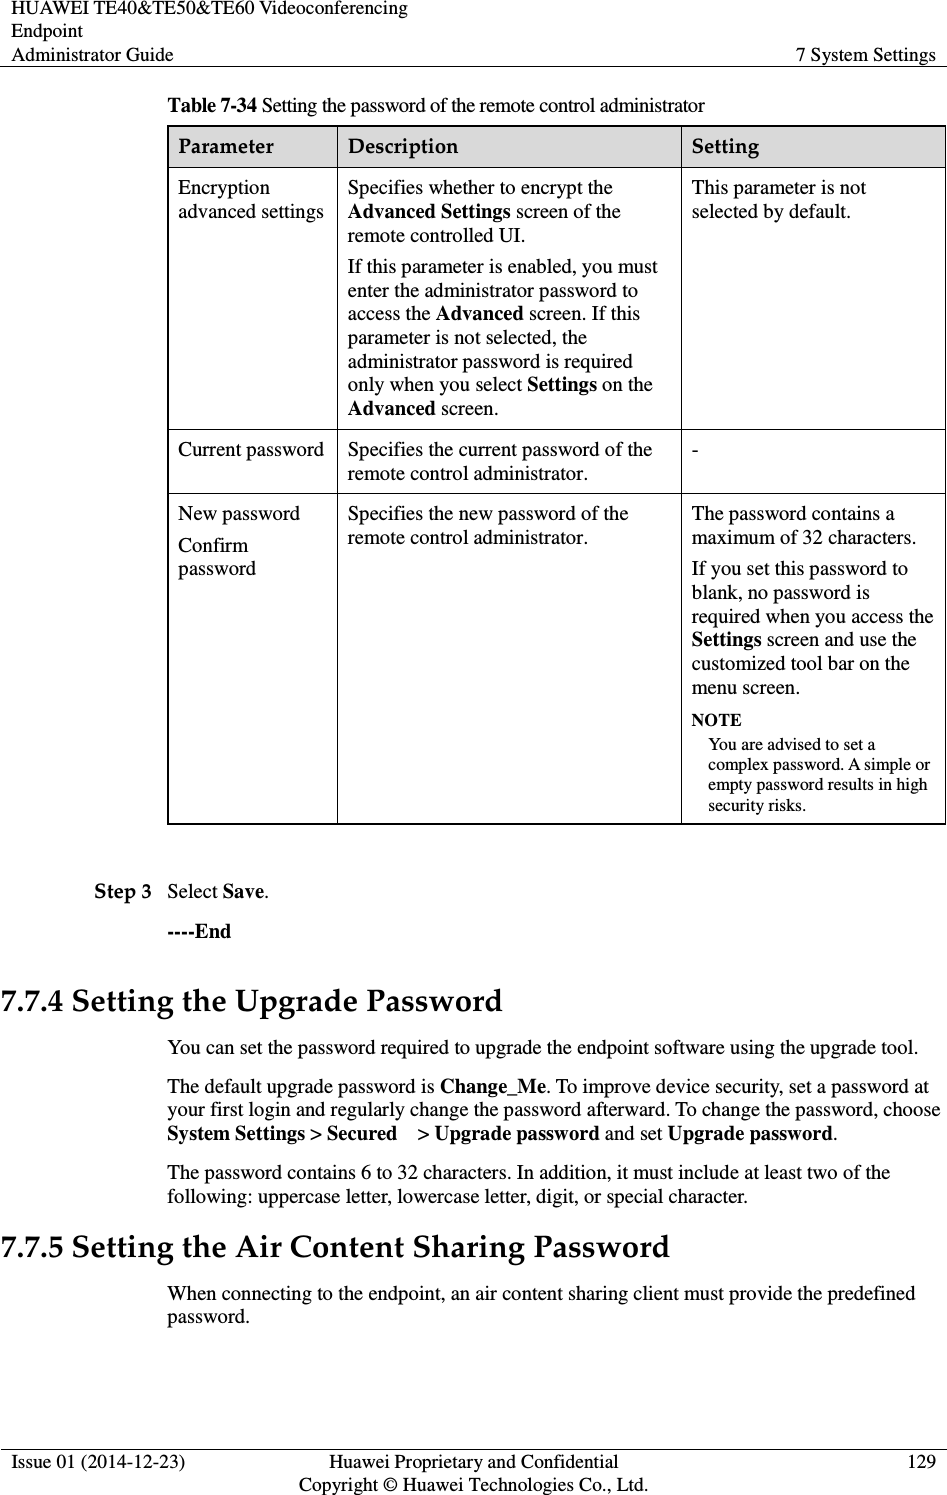 HUAWEI TE40&amp;TE50&amp;TE60 Videoconferencing Endpoint Administrator Guide  7 System Settings  Issue 01 (2014-12-23)  Huawei Proprietary and Confidential                                     Copyright © Huawei Technologies Co., Ltd. 129  Table 7-34 Setting the password of the remote control administrator Parameter  Description  Setting Encryption advanced settings Specifies whether to encrypt the Advanced Settings screen of the remote controlled UI.   If this parameter is enabled, you must enter the administrator password to access the Advanced screen. If this parameter is not selected, the administrator password is required only when you select Settings on the Advanced screen. This parameter is not selected by default. Current password  Specifies the current password of the remote control administrator. - New password Confirm password Specifies the new password of the remote control administrator. The password contains a maximum of 32 characters. If you set this password to blank, no password is required when you access the Settings screen and use the customized tool bar on the menu screen. NOTE You are advised to set a complex password. A simple or empty password results in high security risks.  Step 3 Select Save. ----End 7.7.4 Setting the Upgrade Password You can set the password required to upgrade the endpoint software using the upgrade tool. The default upgrade password is Change_Me. To improve device security, set a password at your first login and regularly change the password afterward. To change the password, choose System Settings &gt; Secured    &gt; Upgrade password and set Upgrade password. The password contains 6 to 32 characters. In addition, it must include at least two of the following: uppercase letter, lowercase letter, digit, or special character. 7.7.5 Setting the Air Content Sharing Password When connecting to the endpoint, an air content sharing client must provide the predefined password. 